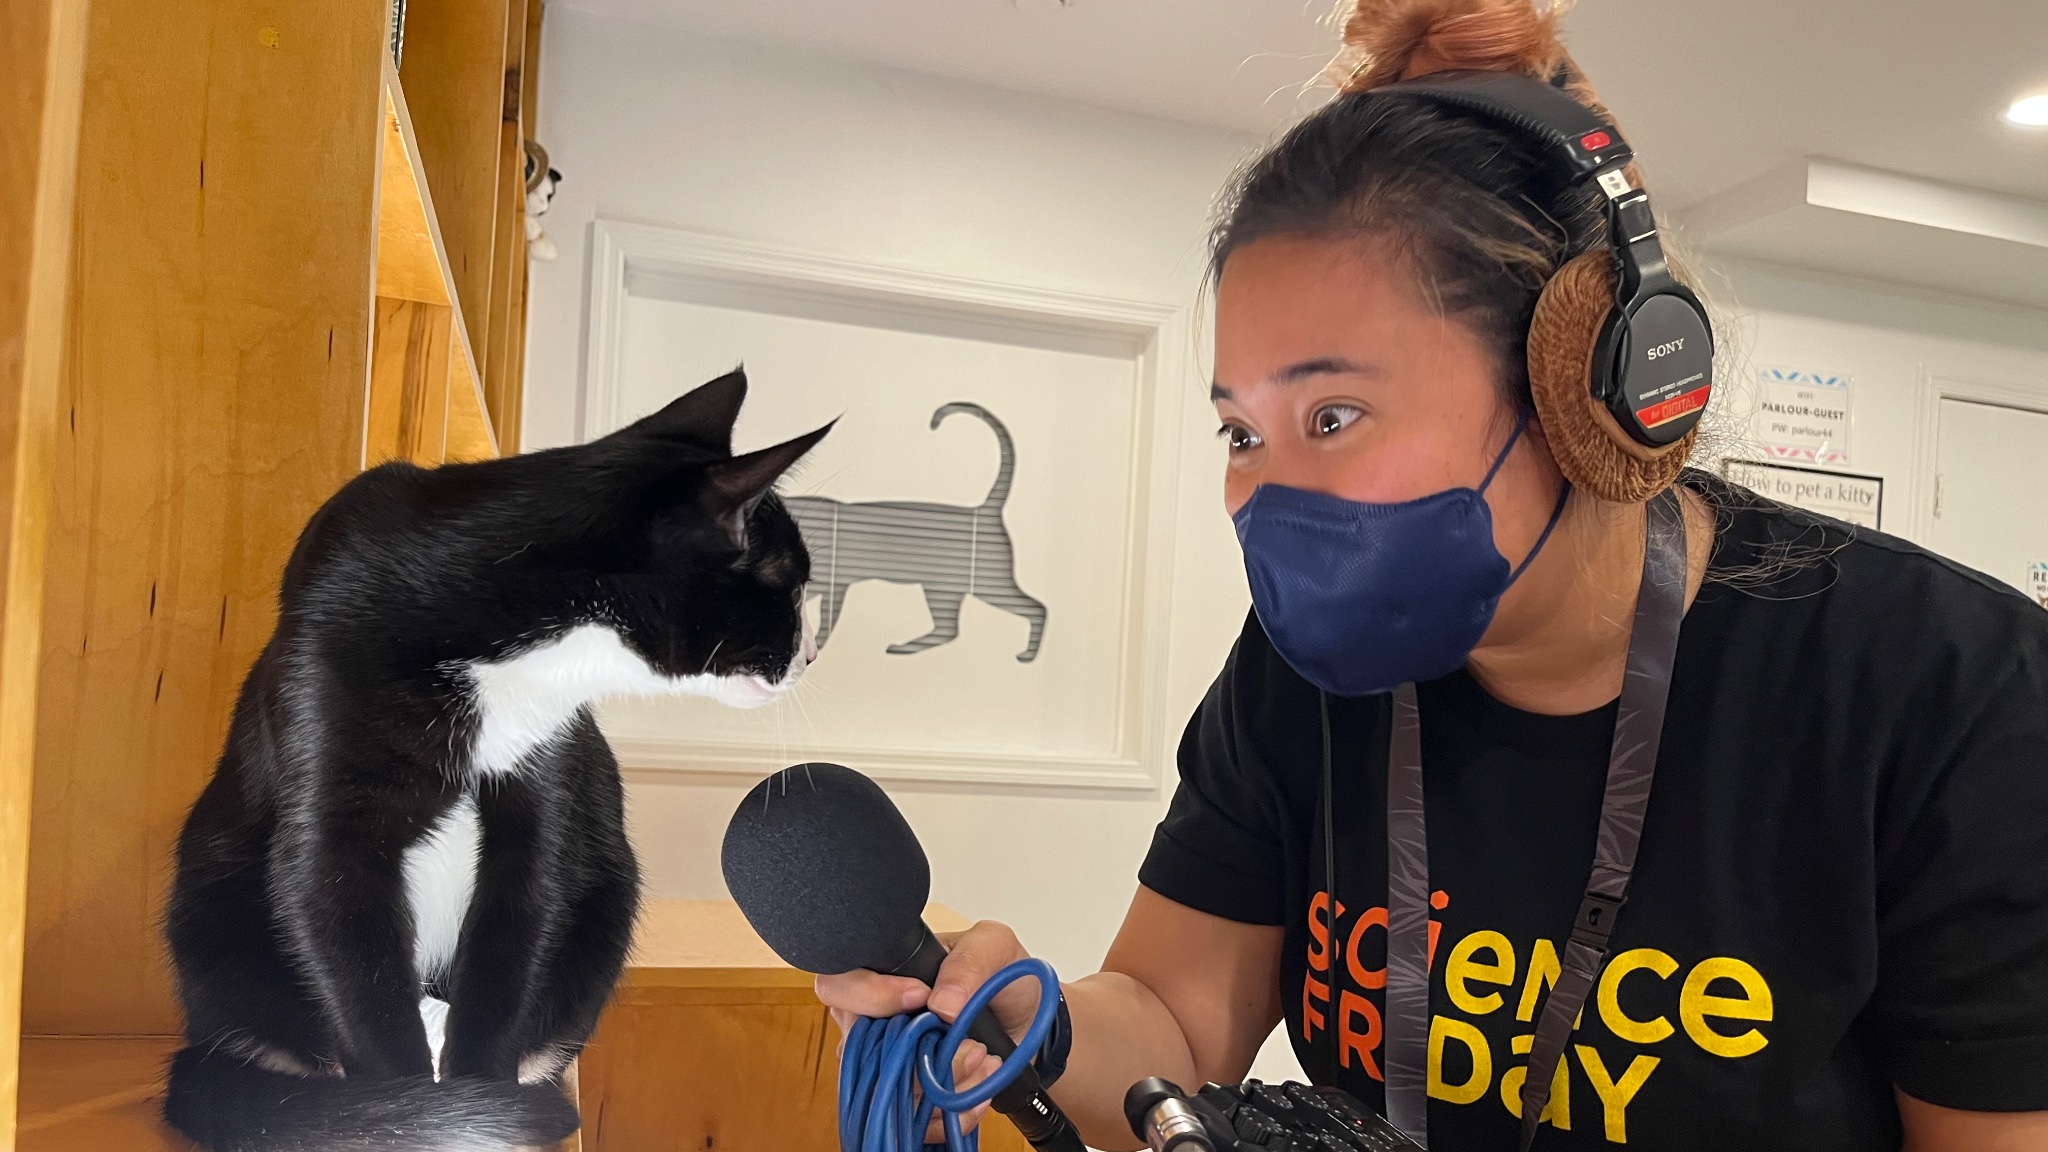 woman wearing a mask, headphones, and a black shirt that says science friday holds up a microphone to a black and white cat